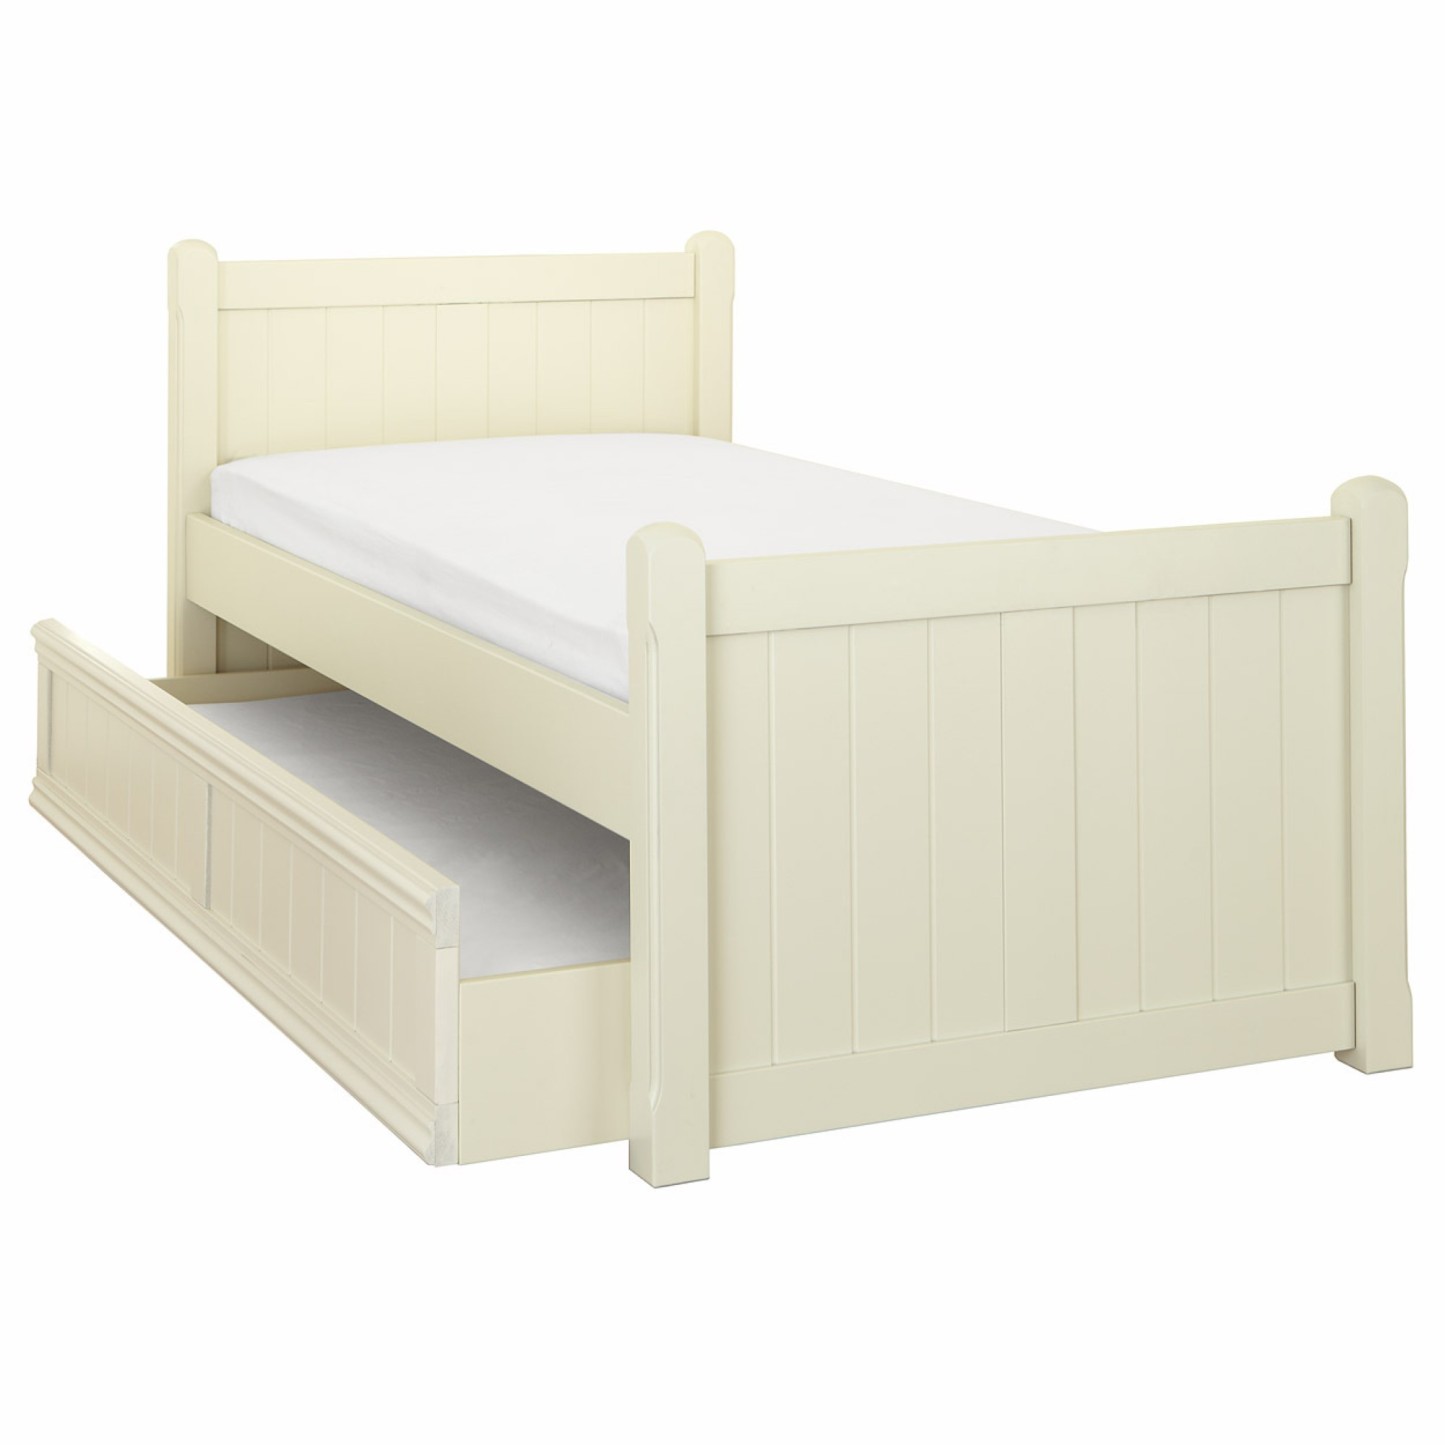 Charterhouse Children's Sleepover Bed With Drawers - Antique White